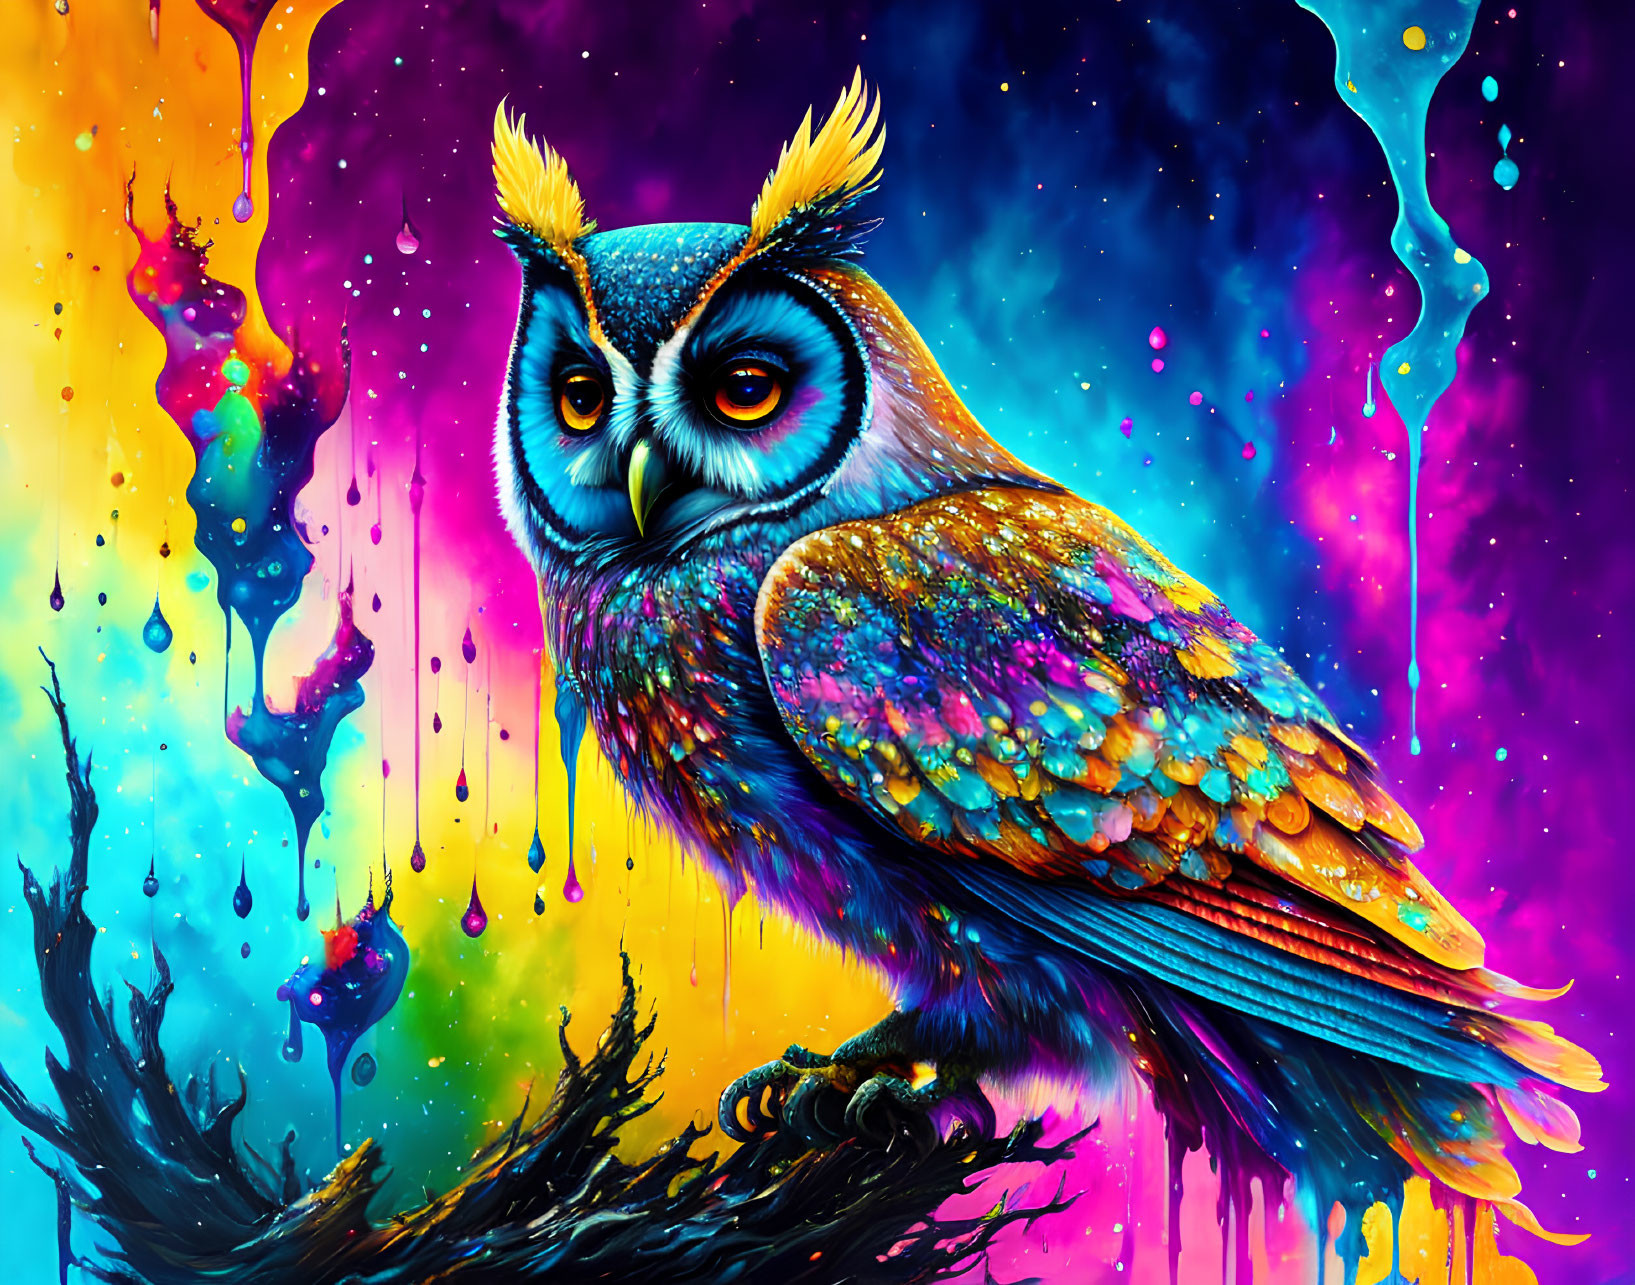 Colorful Owl Illustration with Psychedelic Blues, Oranges, and Purples